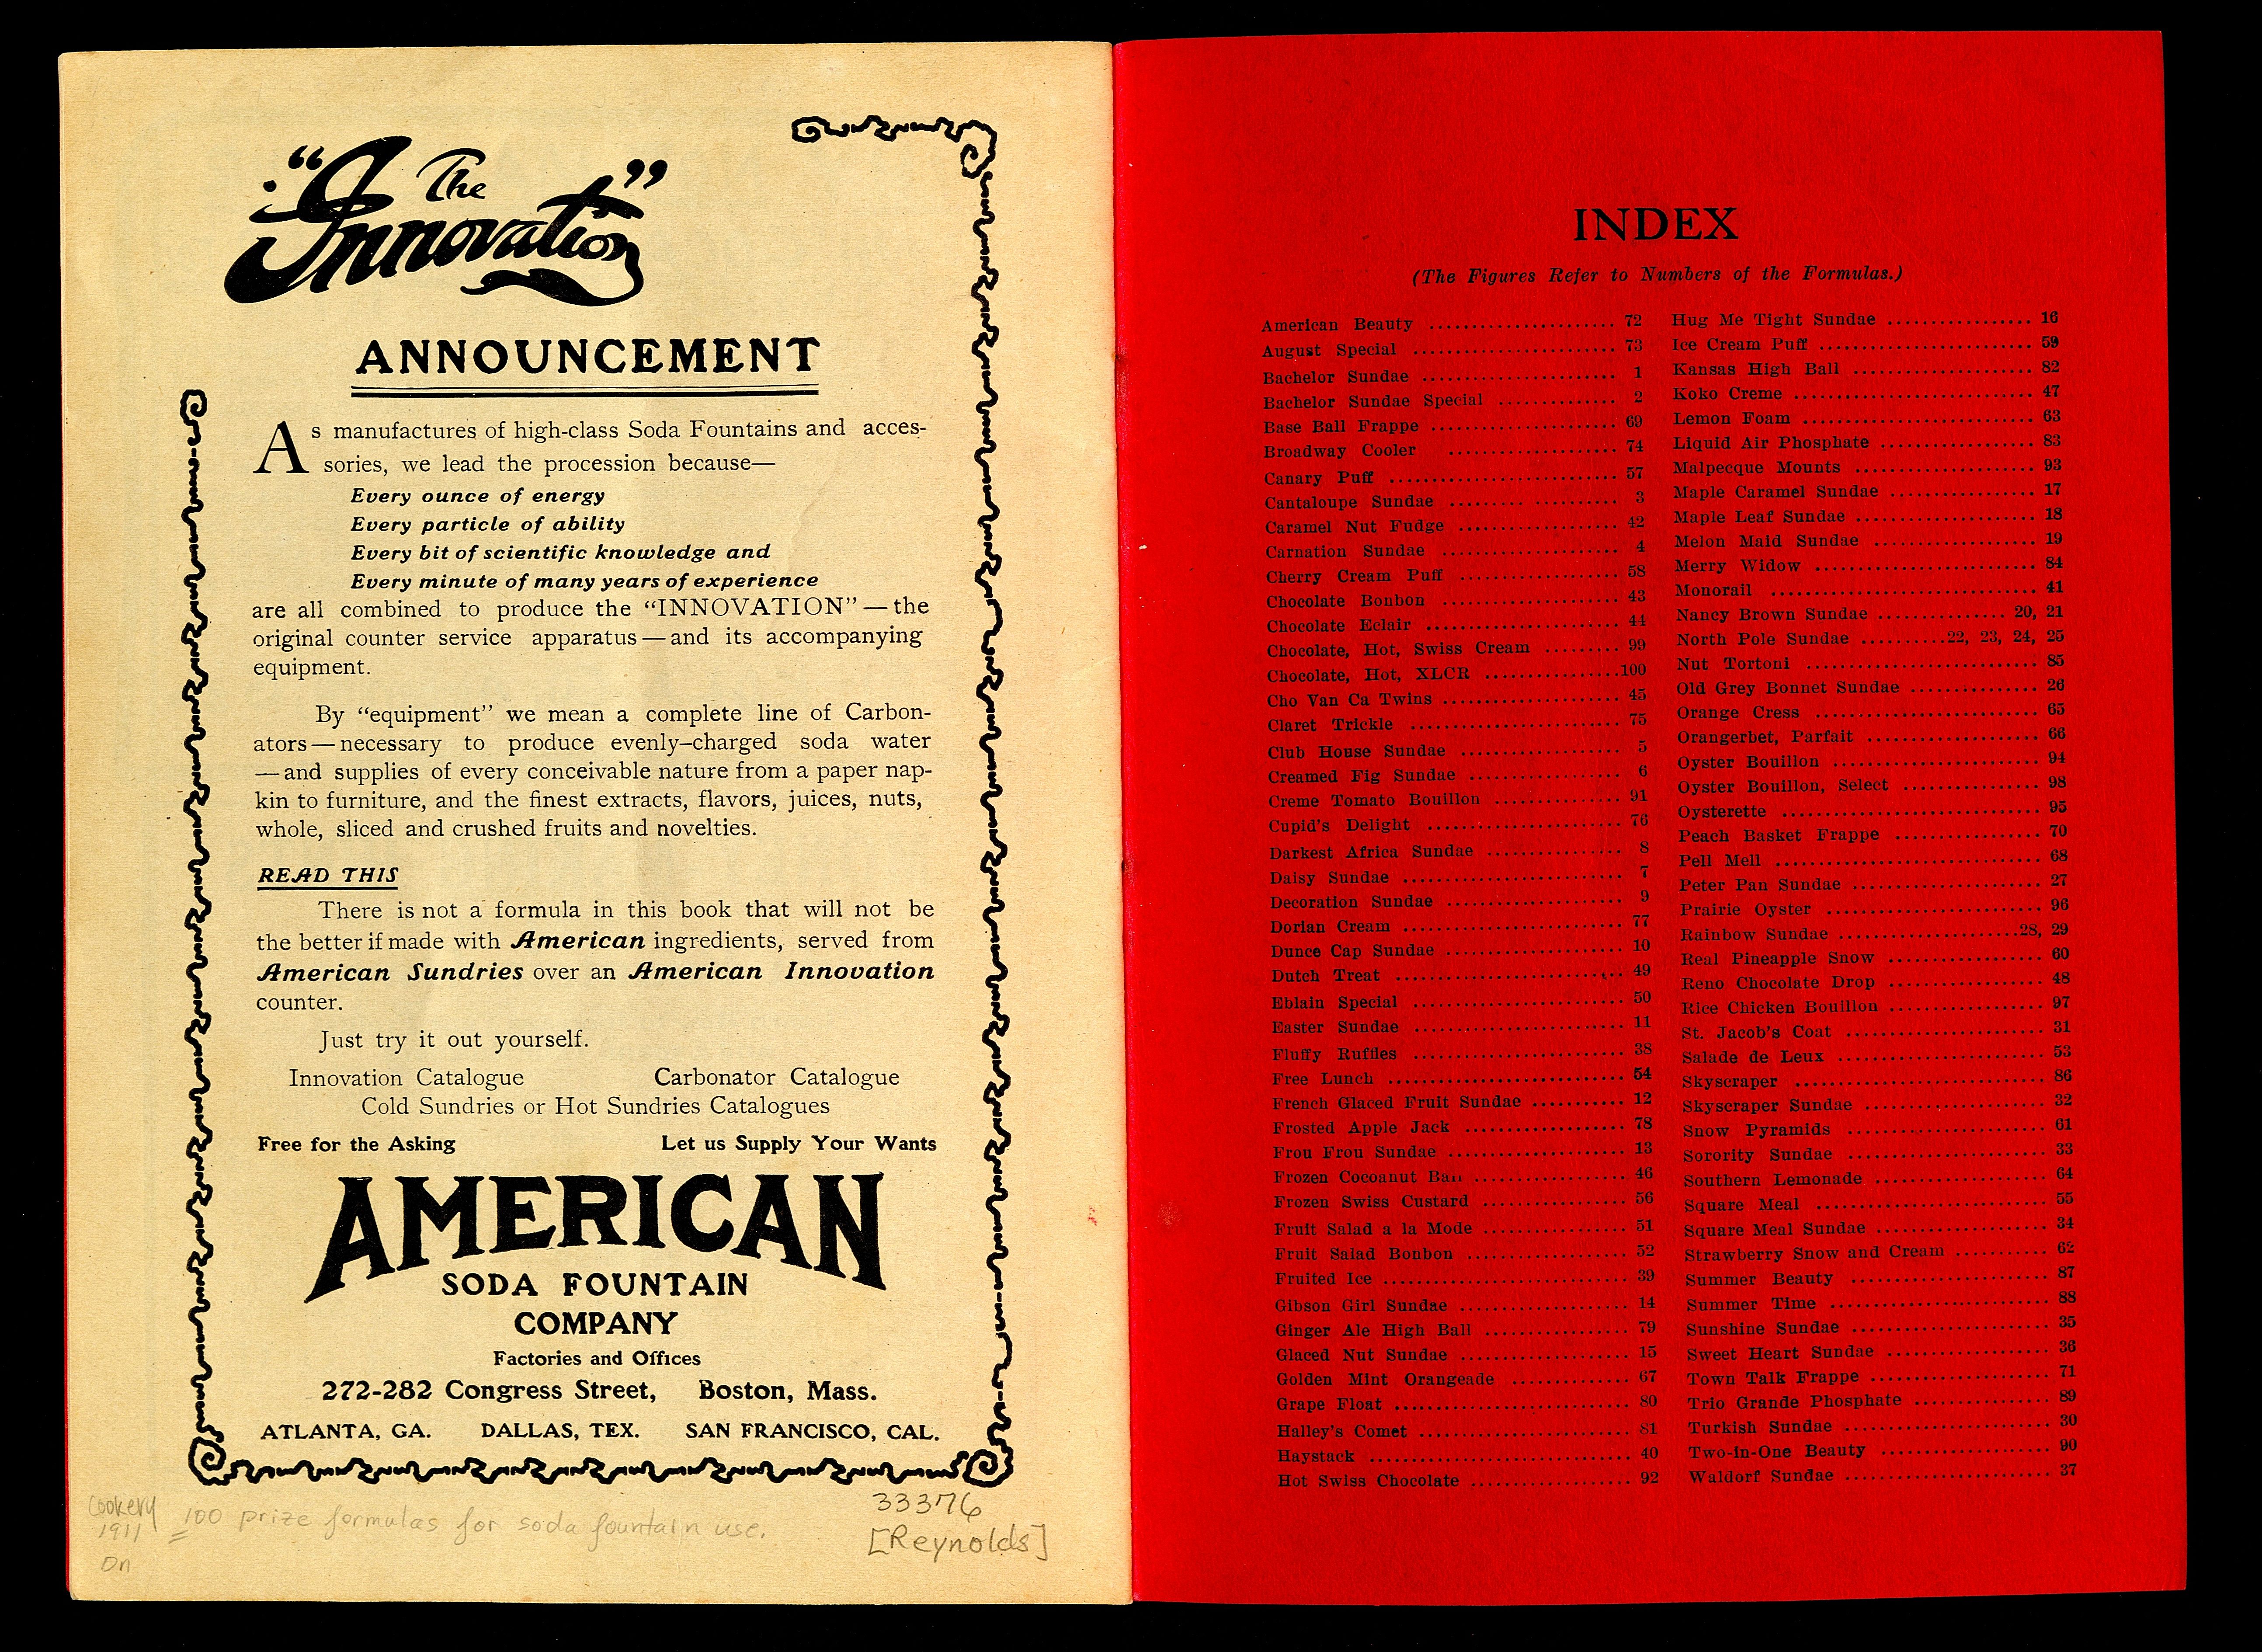 Last pagespread of the book of soda fountain recipes, with an ad for the American Soda Fountain Company and an index to recipes such as  American Beauty, Frosted Apple Jack, and Sweetheart Sundae